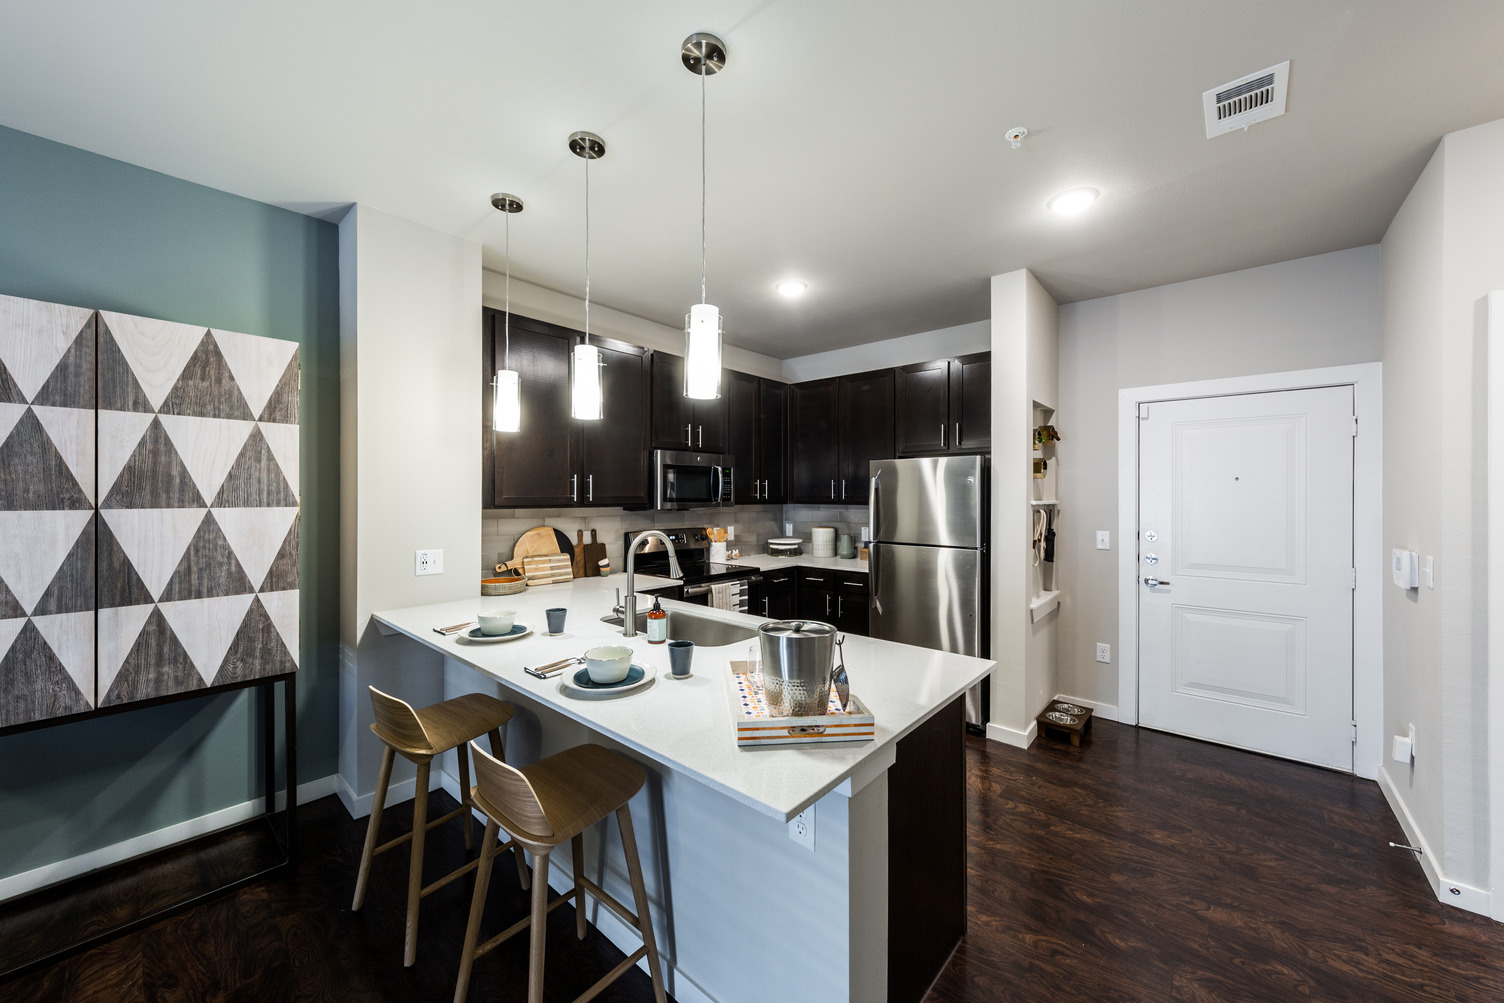 Model apartment kitchen with barstool seating, undermount sink, and dark kitchen cabinets